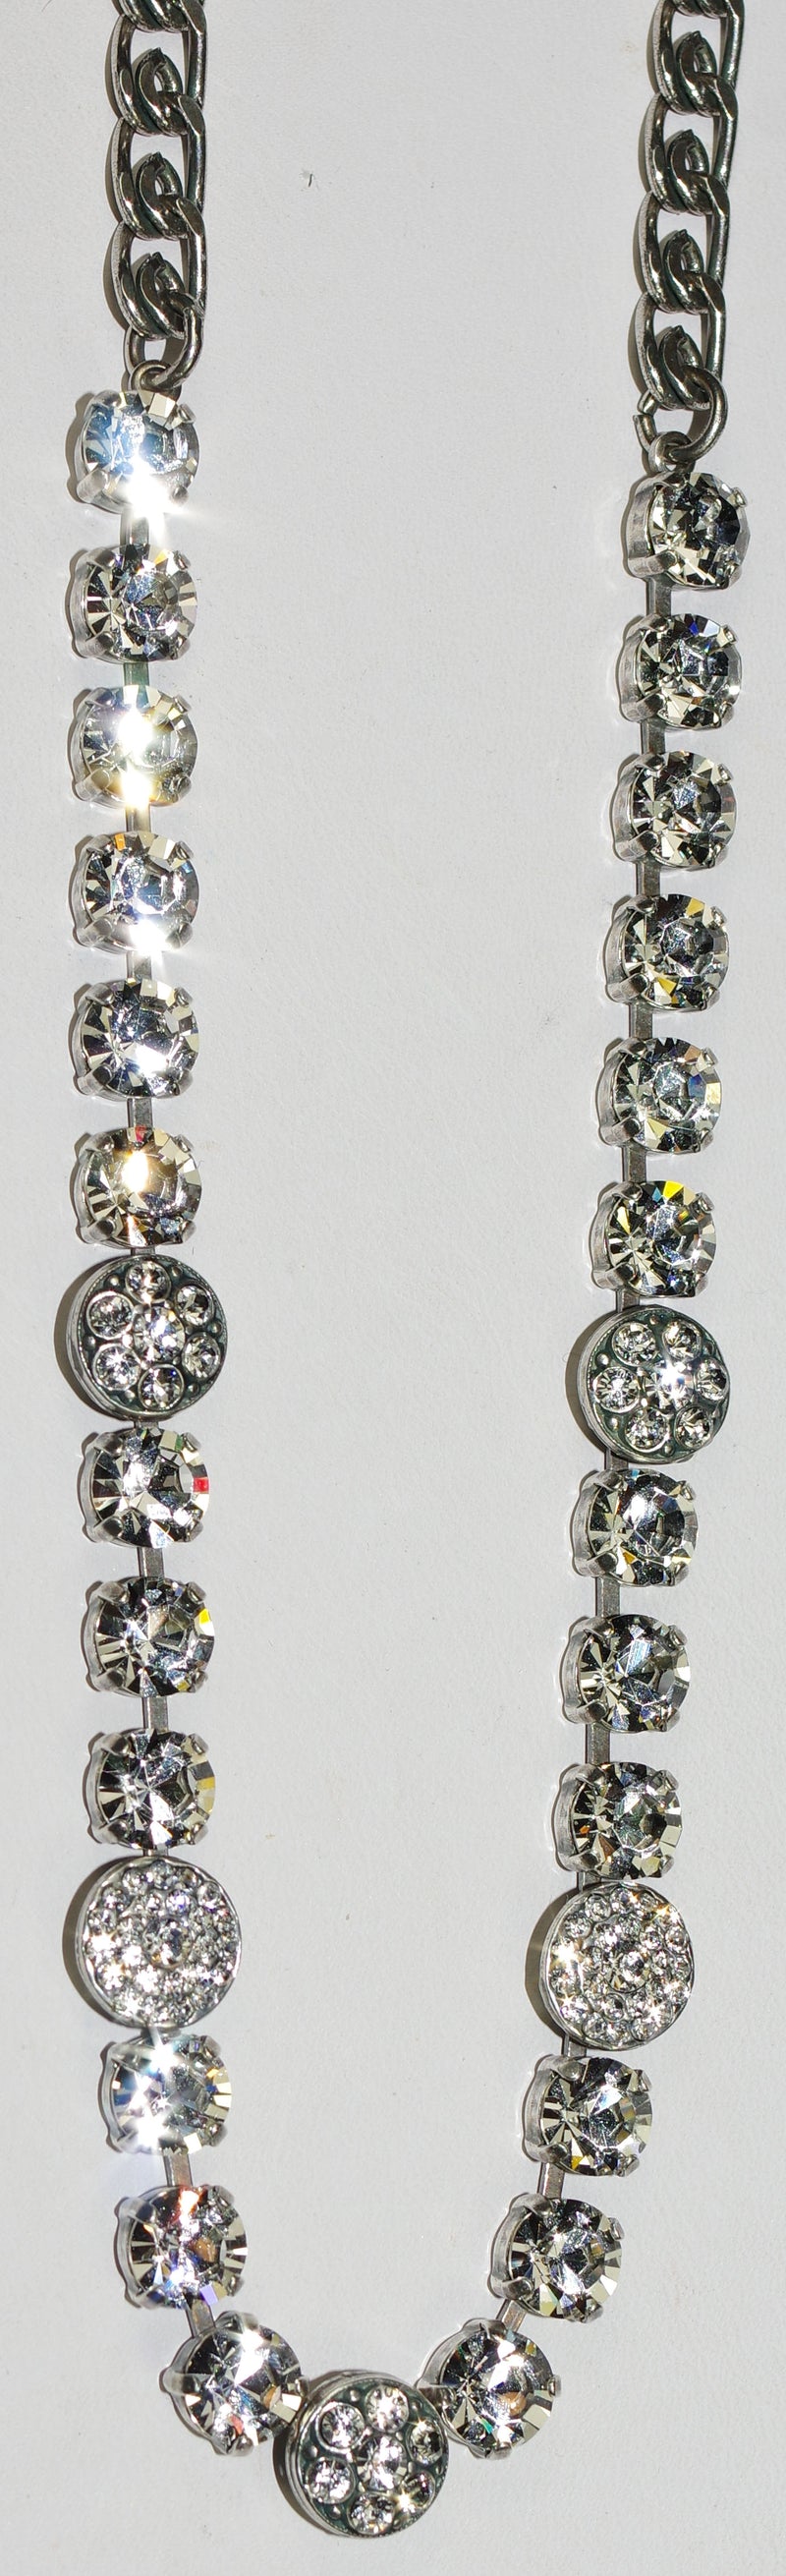 MARIANA NECKLACE ON A CLEAR DAY: clear stones in silver rhodium setting, large stones = 3/8", 18" adjustable chain